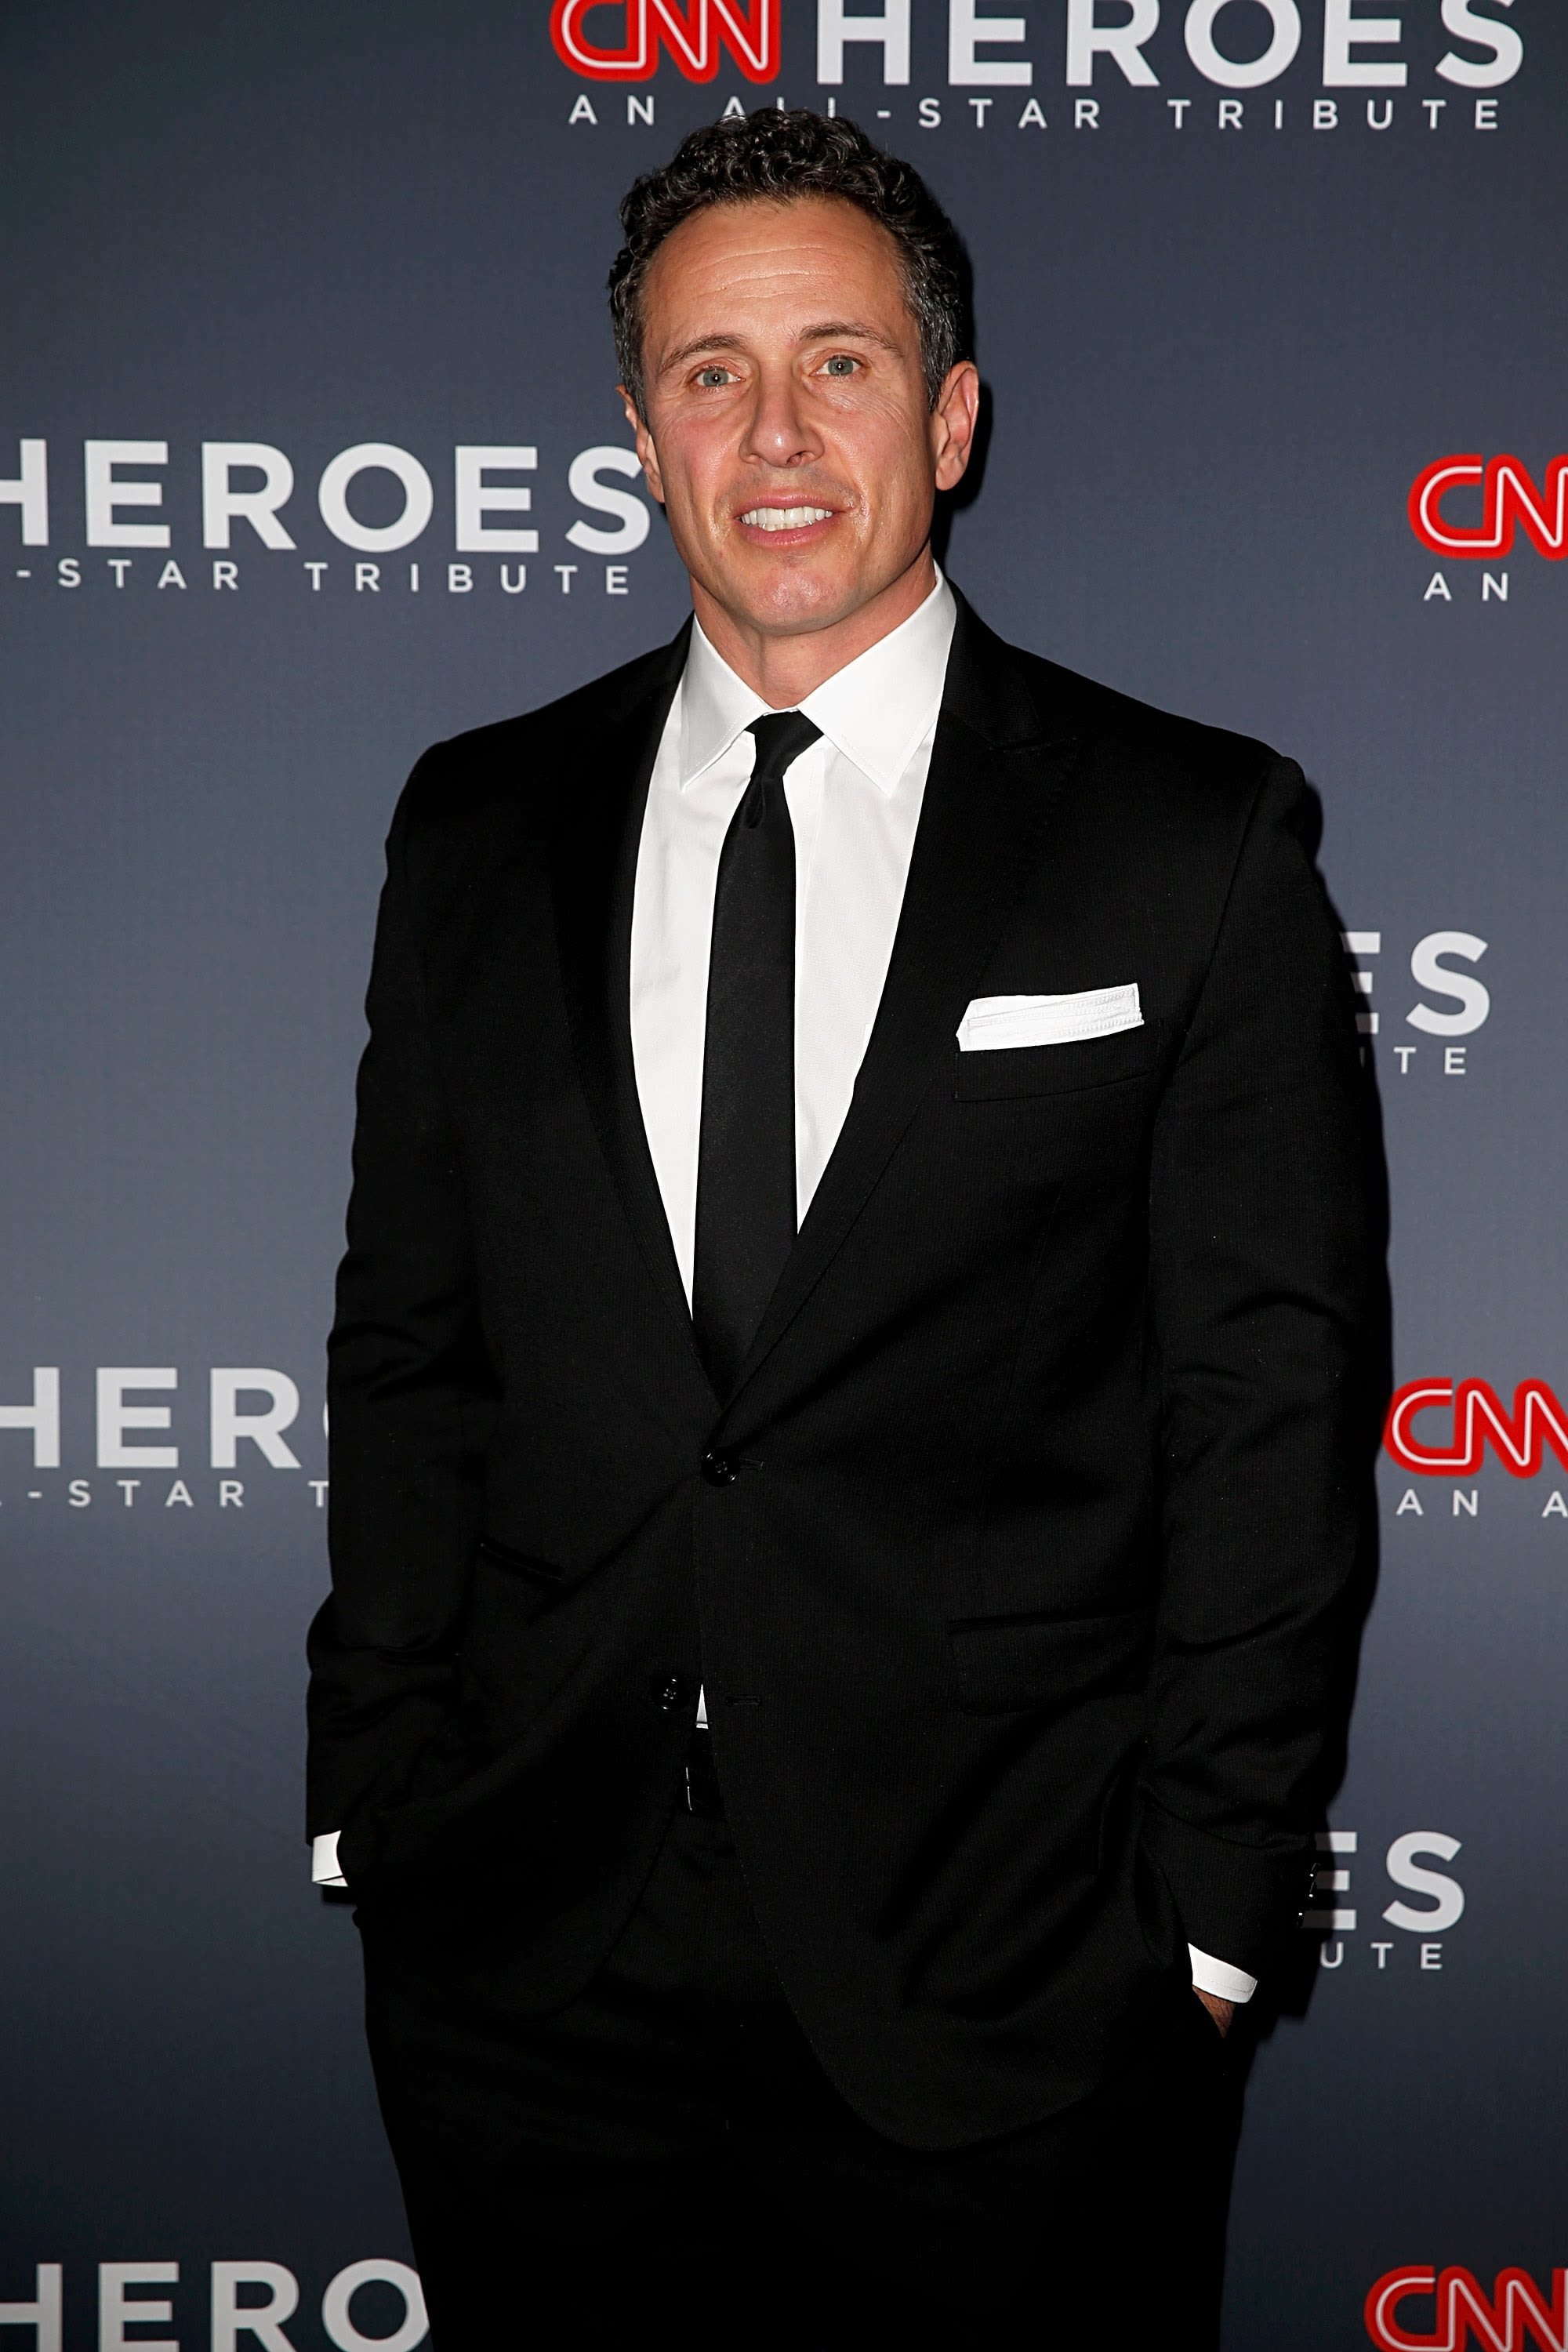 CNN Hoping Chris Cuomo Will ‘Come Back to Help Save the Network’ After His Firing